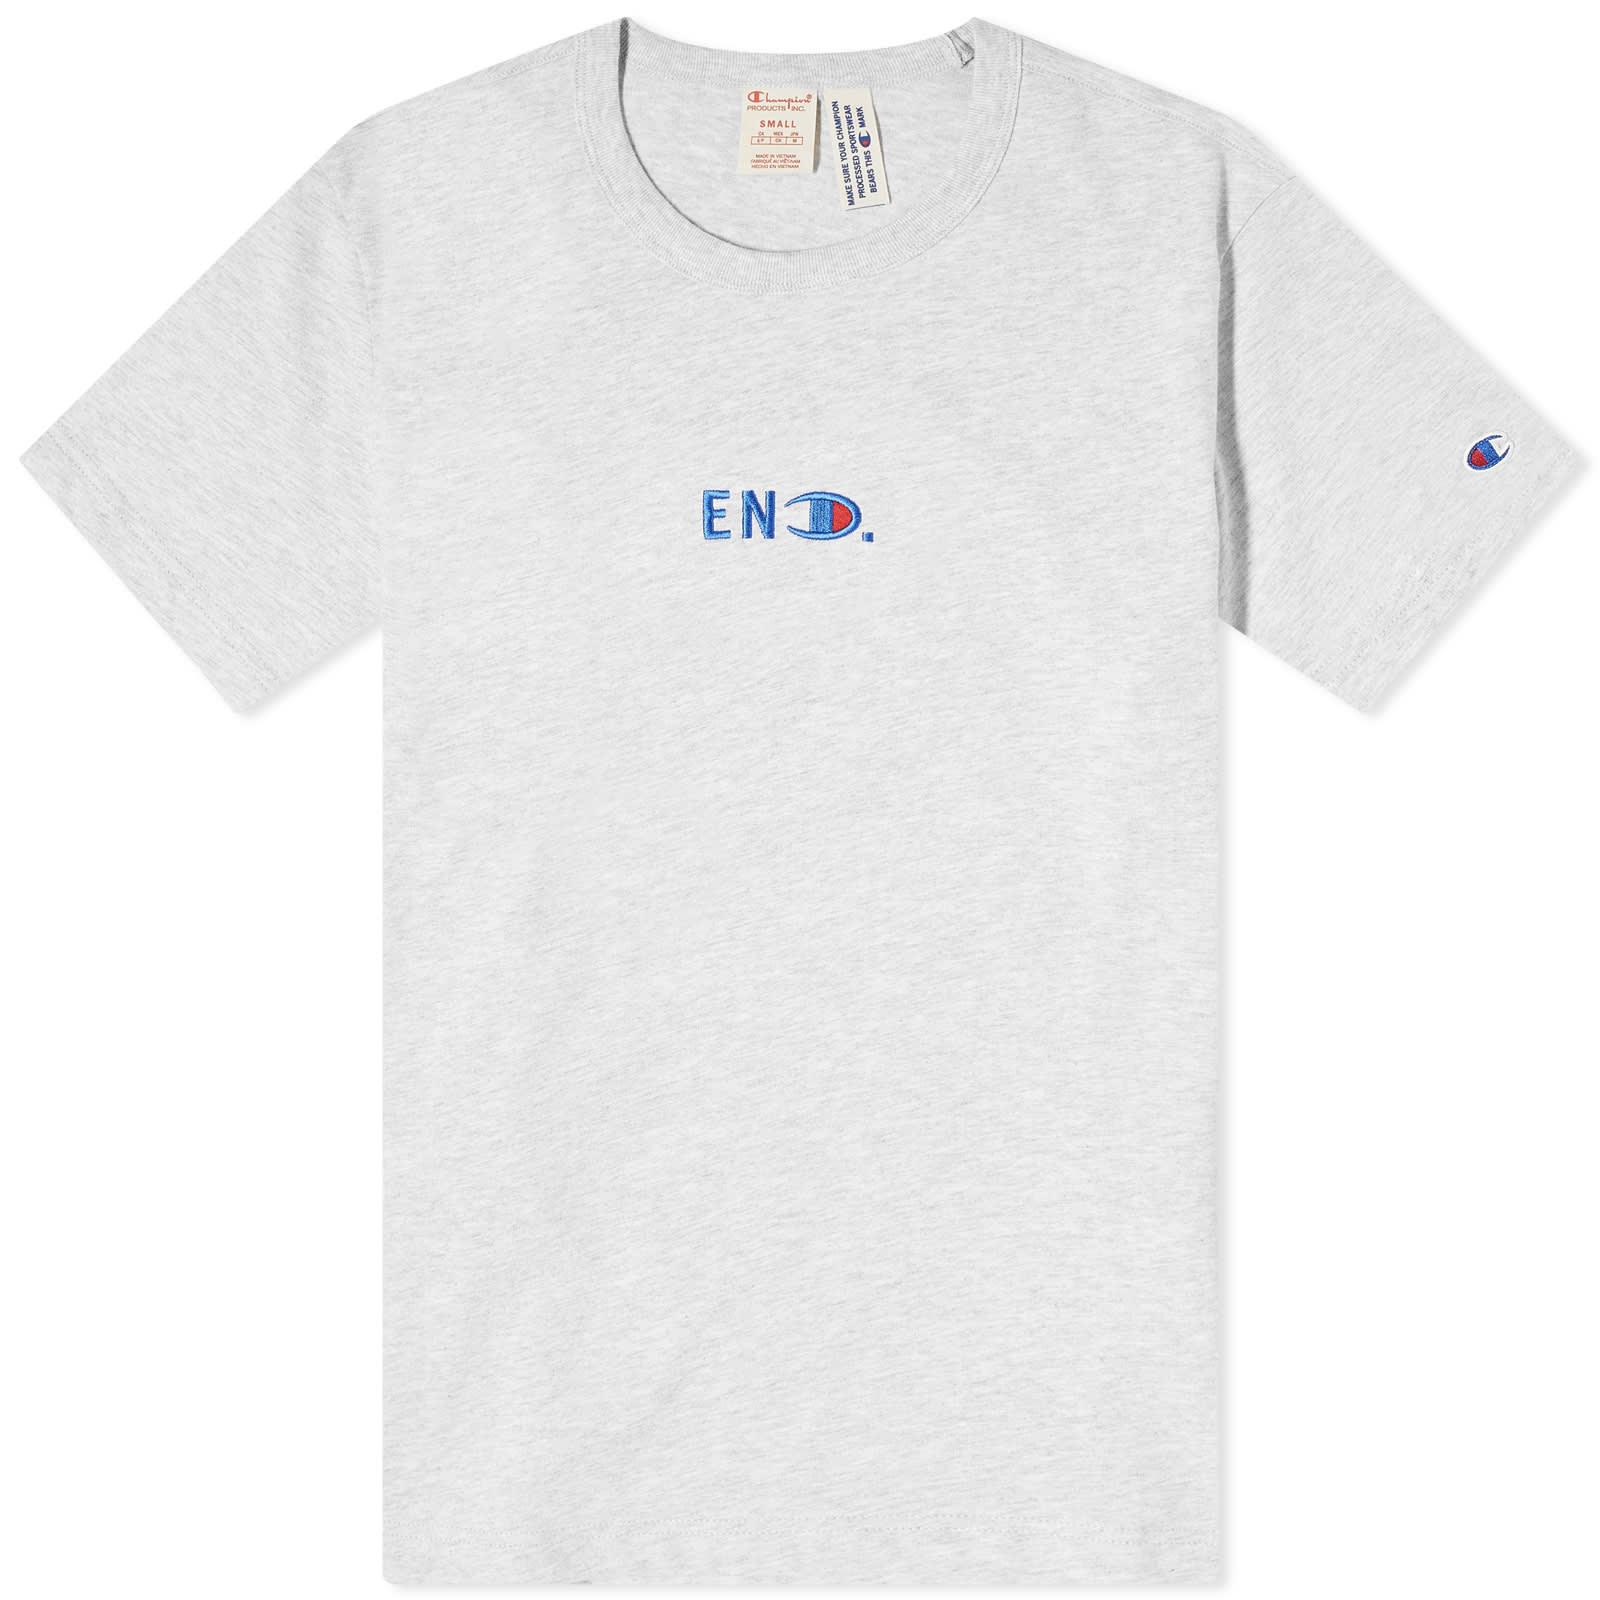 Champion End. X T-shirt in White